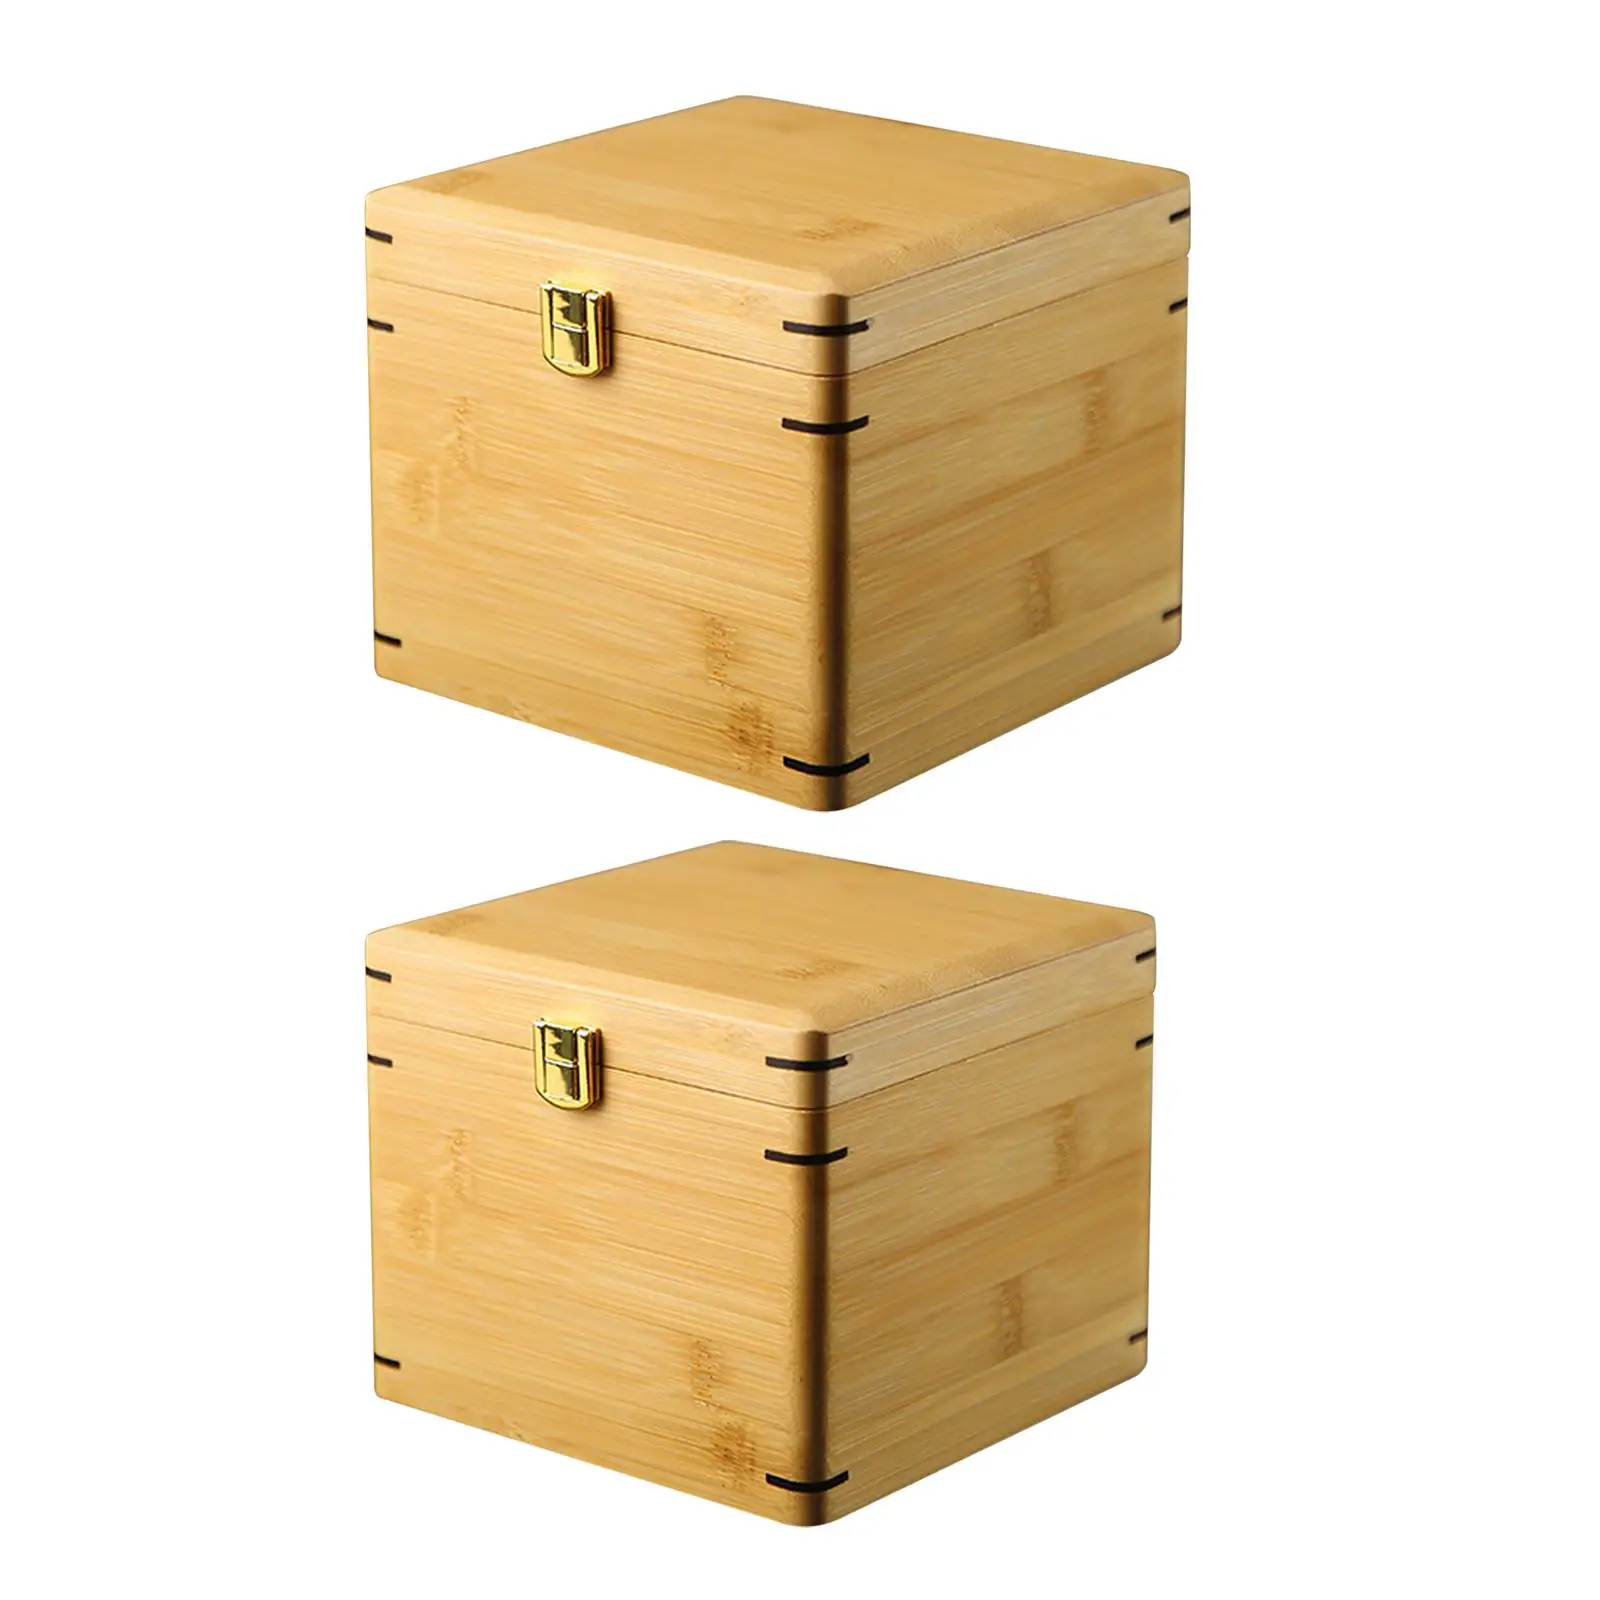 Bamboo Wood Storage Box Wooden Storage Box for Crafts Art and DIY Hobbies